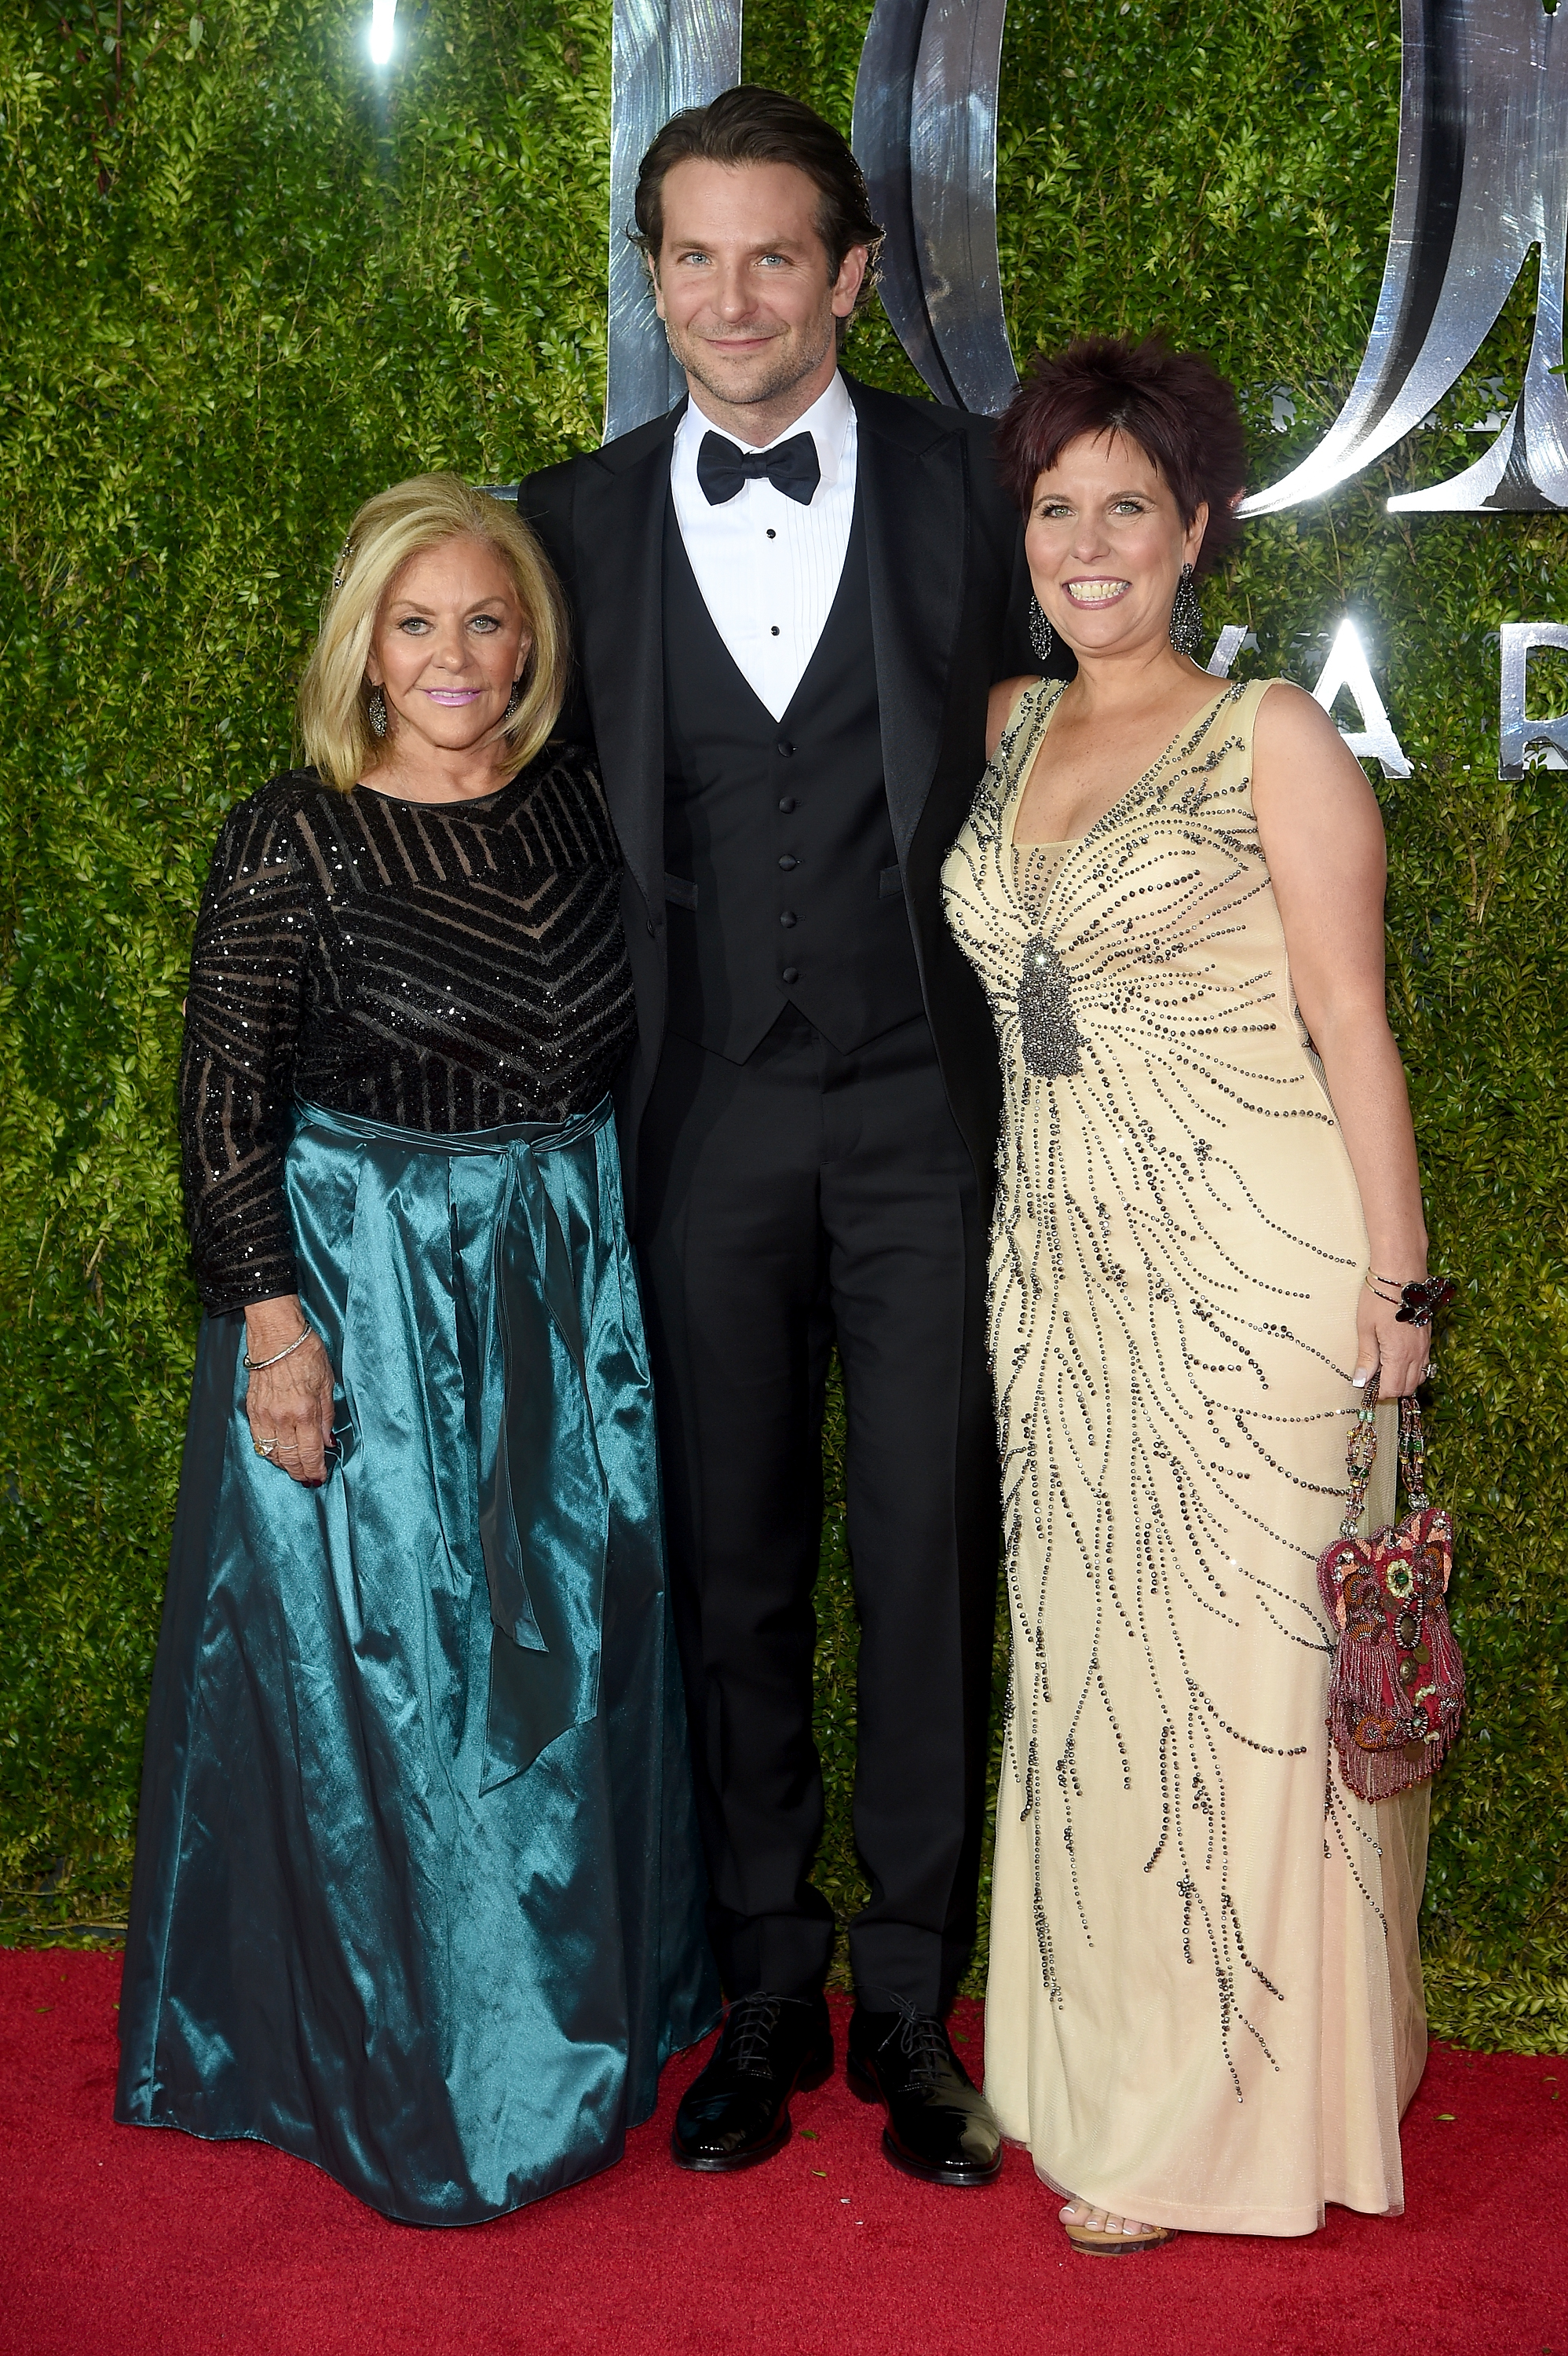 Gloria Campano, Bradley Cooper, and his sister Holly Cooper attend the 2015 Tony Awards at Radio City Music Hall on June 7, 2015, in New York City. | Source: Getty Images